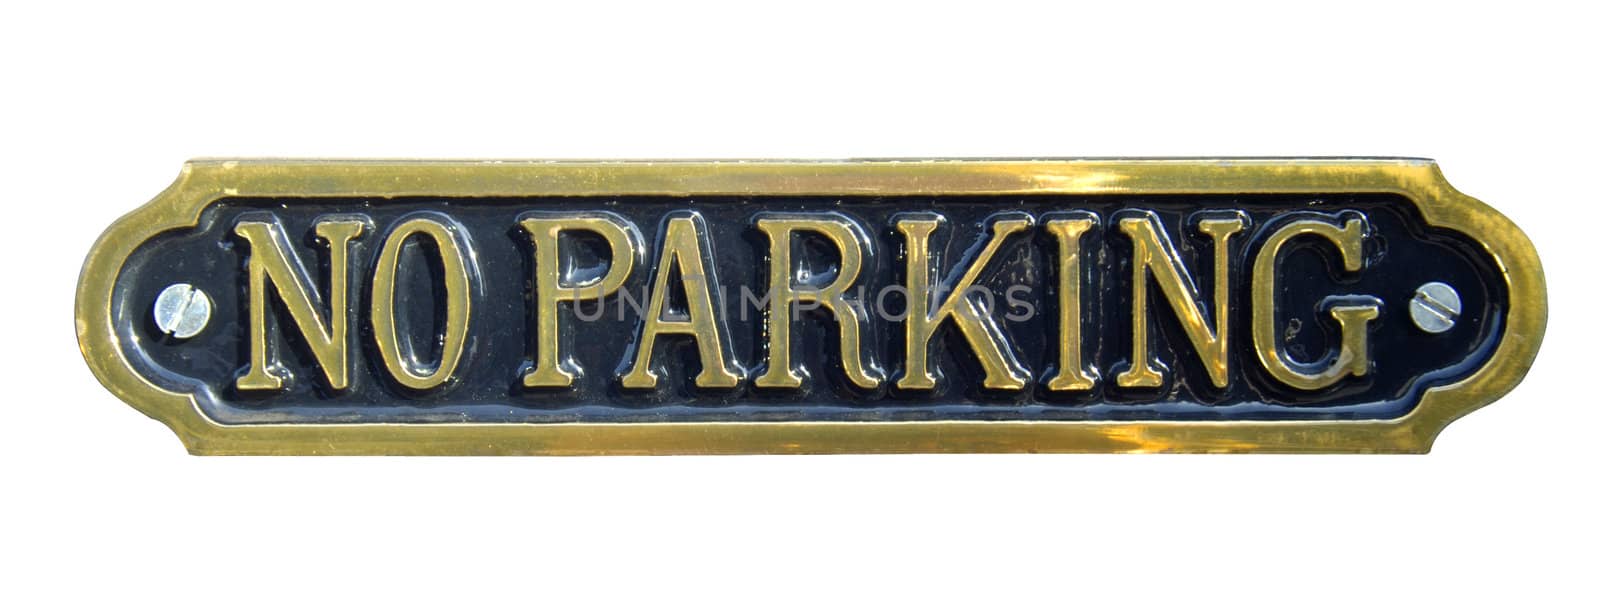 A 'No Parking' sign, embossed in brass, with clipping path.